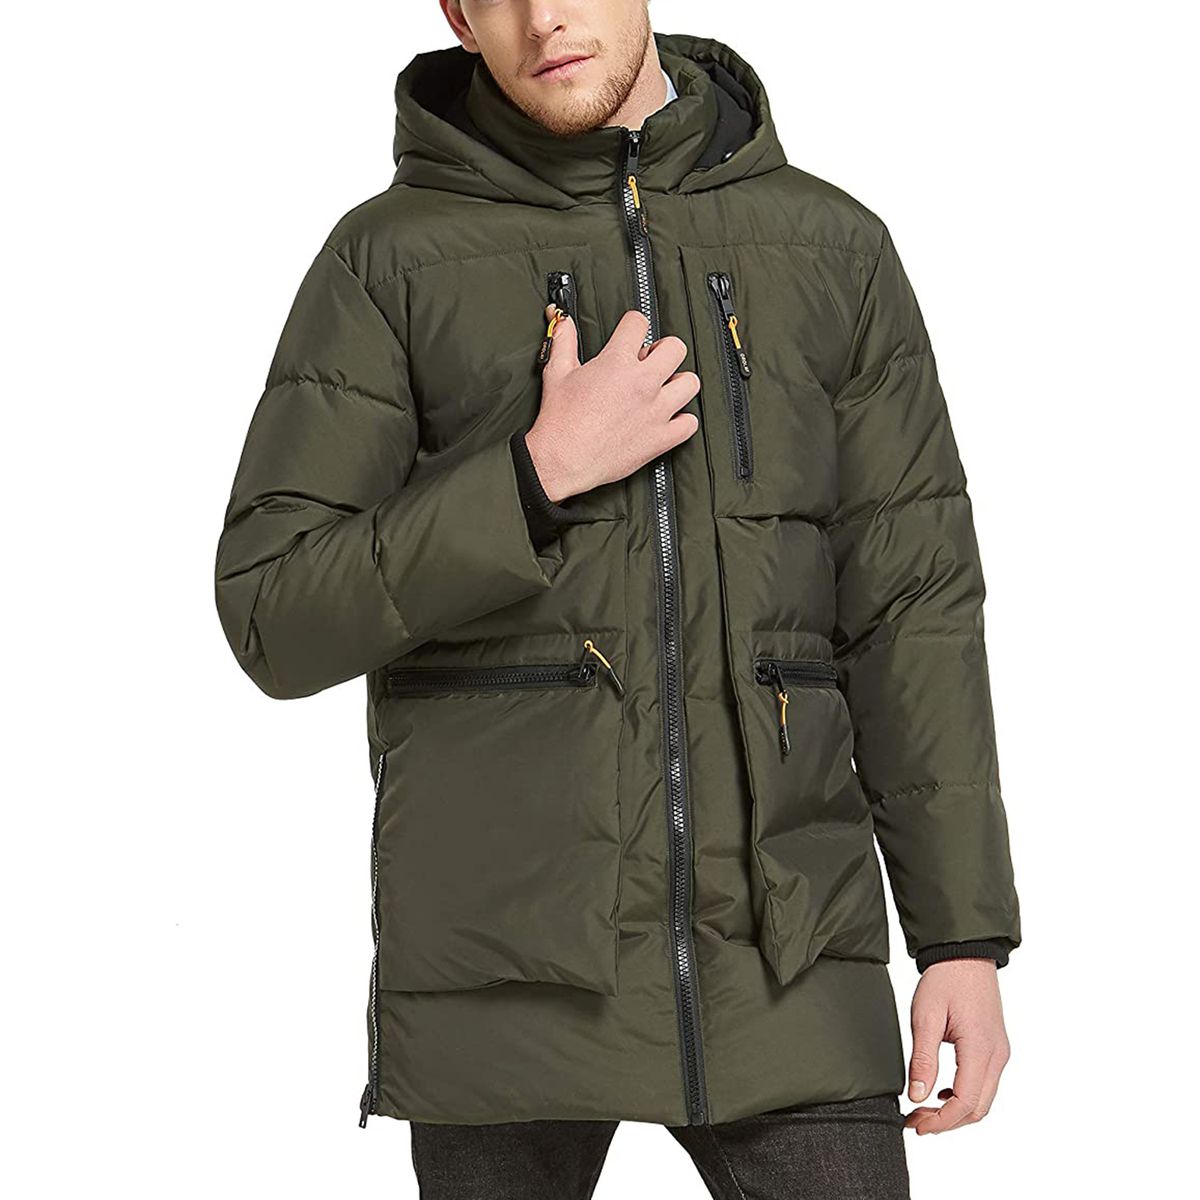 Lisin Mens Autumn Winter New Pure Color Two Piece Outdoor Outfit Windbreak Warm Coat